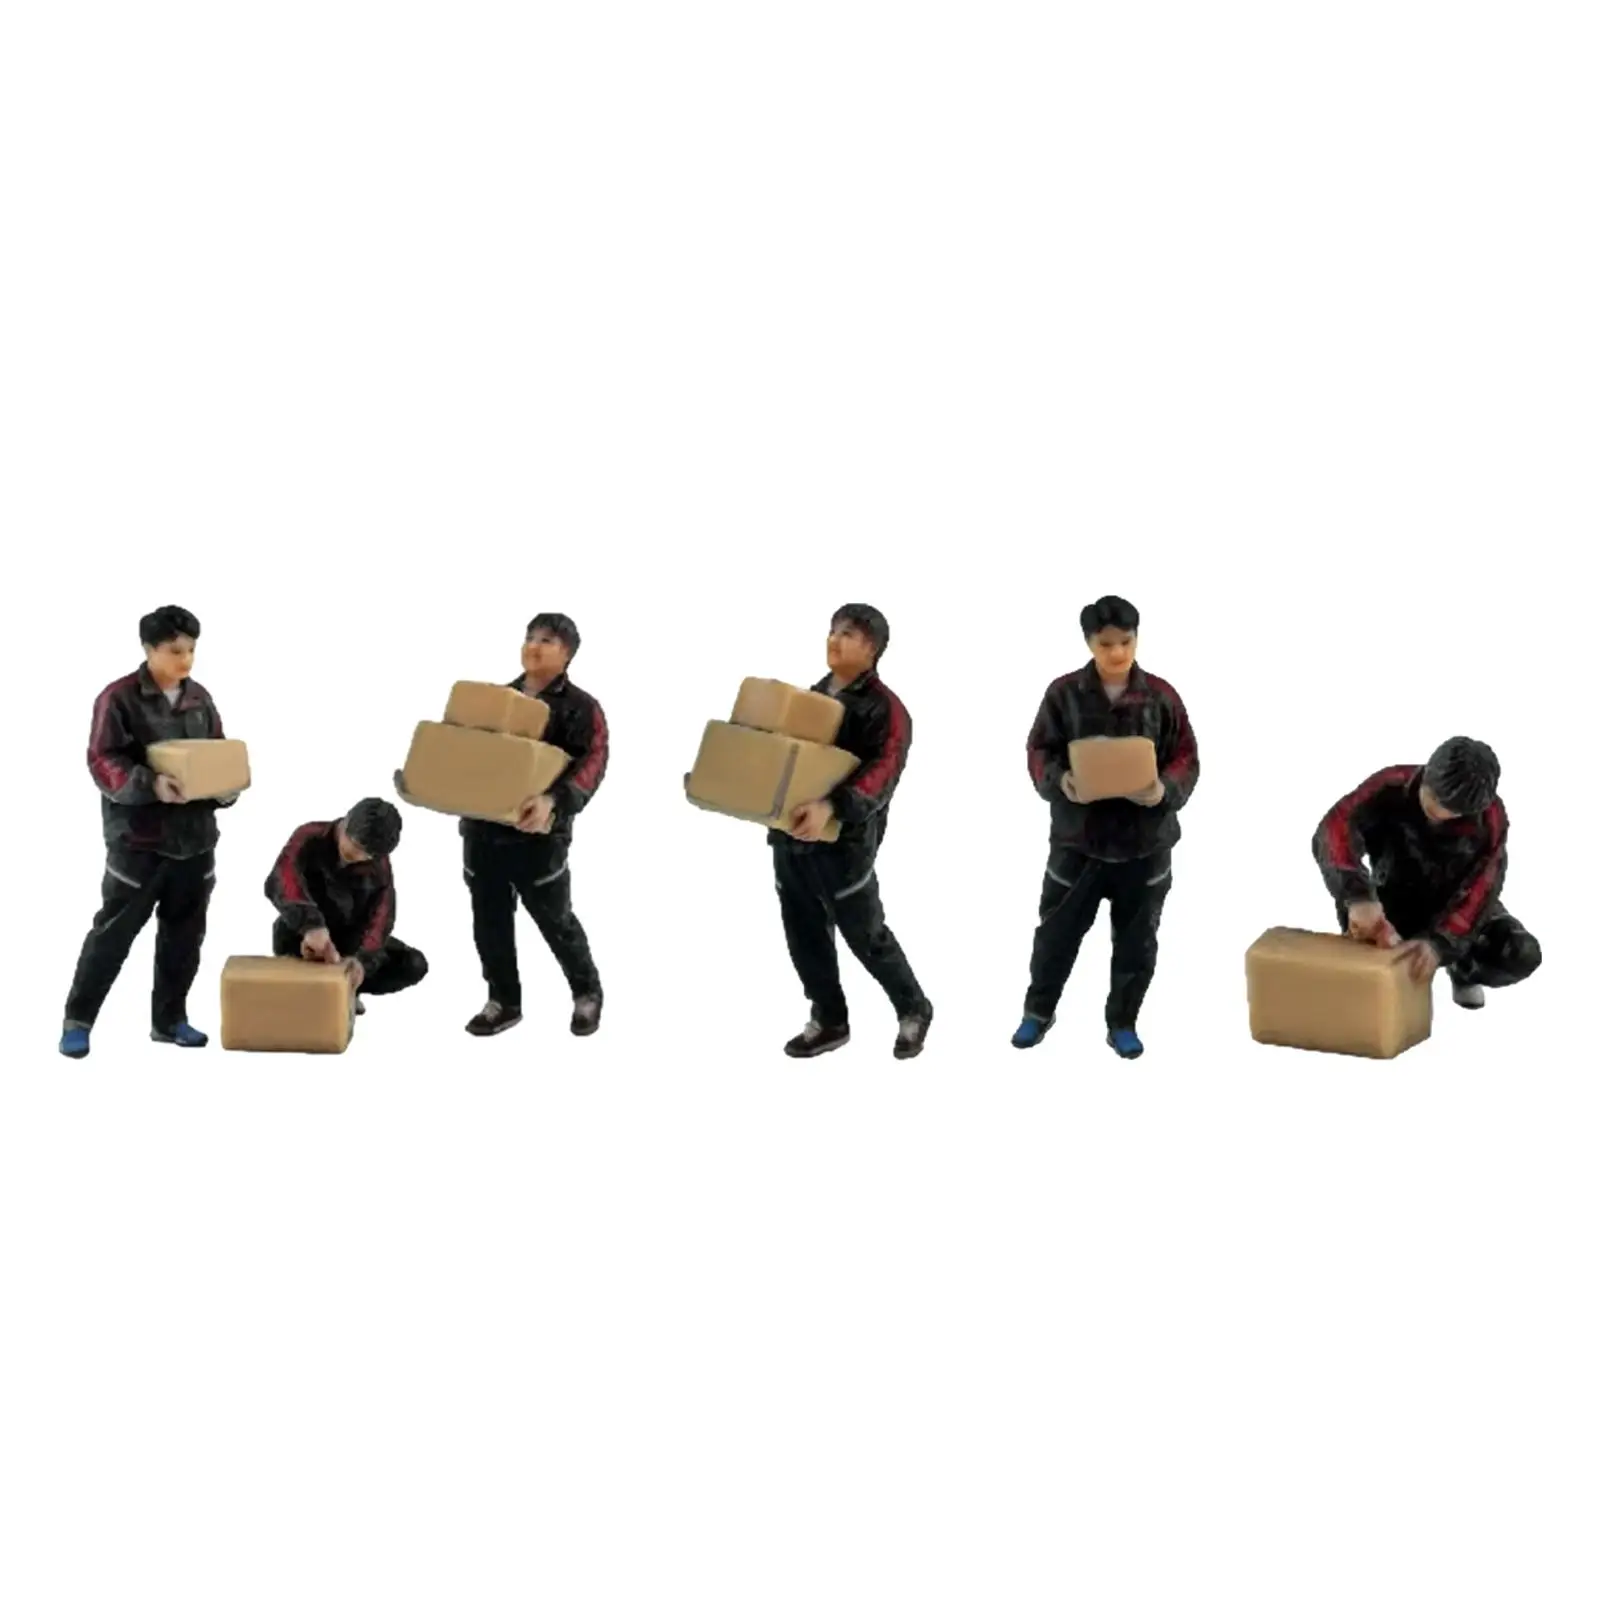 1:64 Coat Figures Handpainted Delivery Man People Figurines Tiny People Model for Micro Landscapes Photography Props Accessories